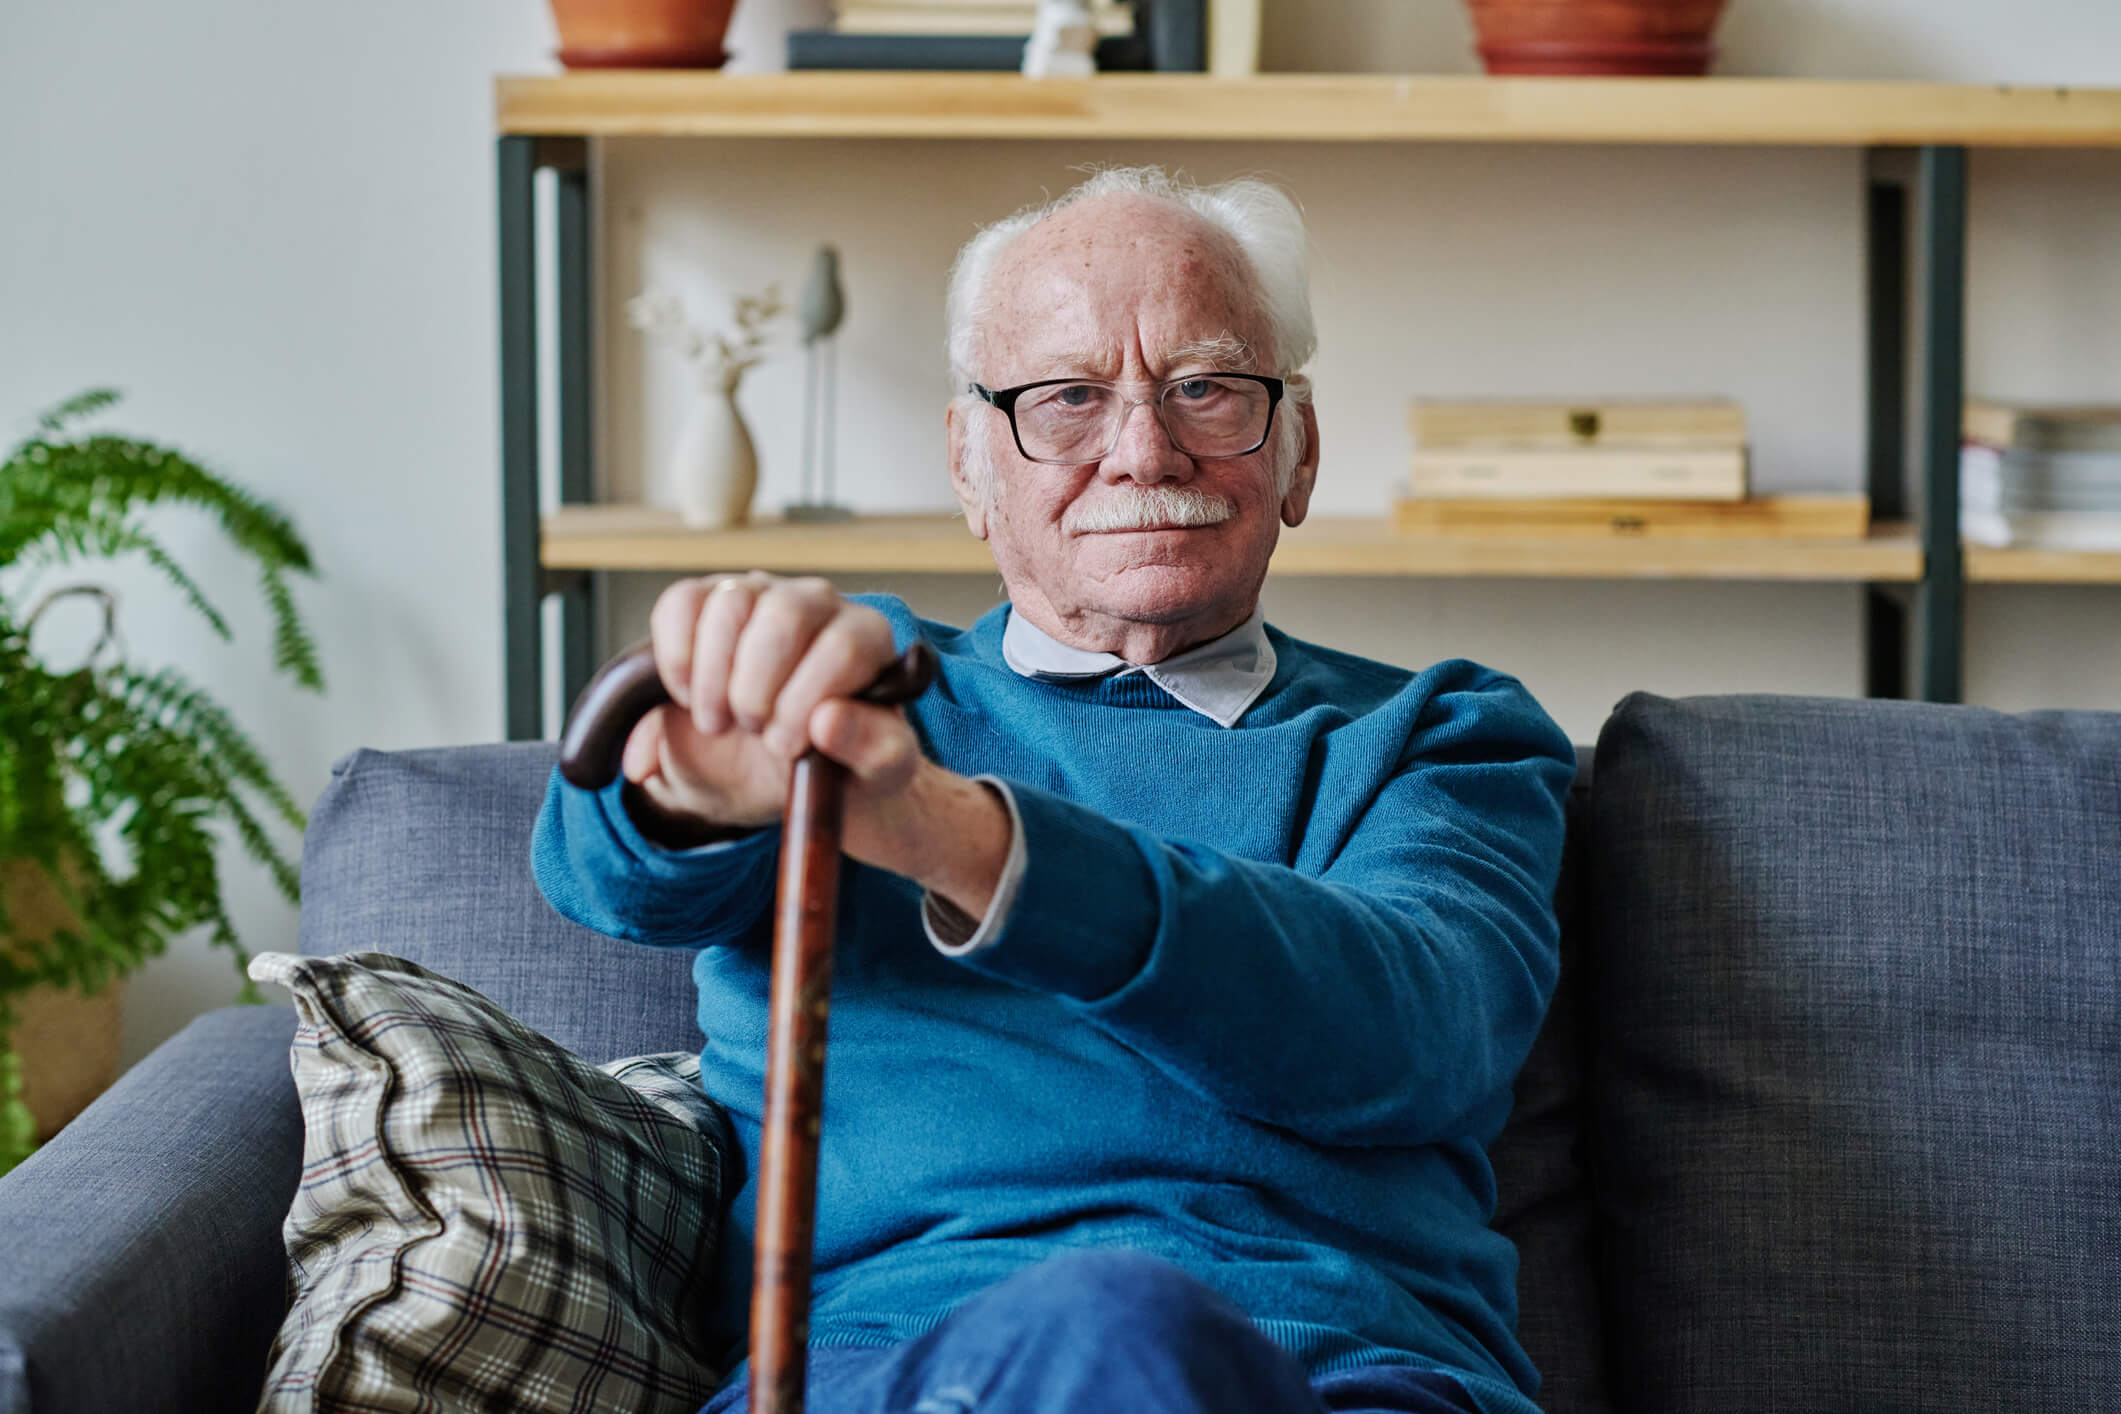 An older man is sitting on a couch and looking ahead; he is holding a cane and smiling.